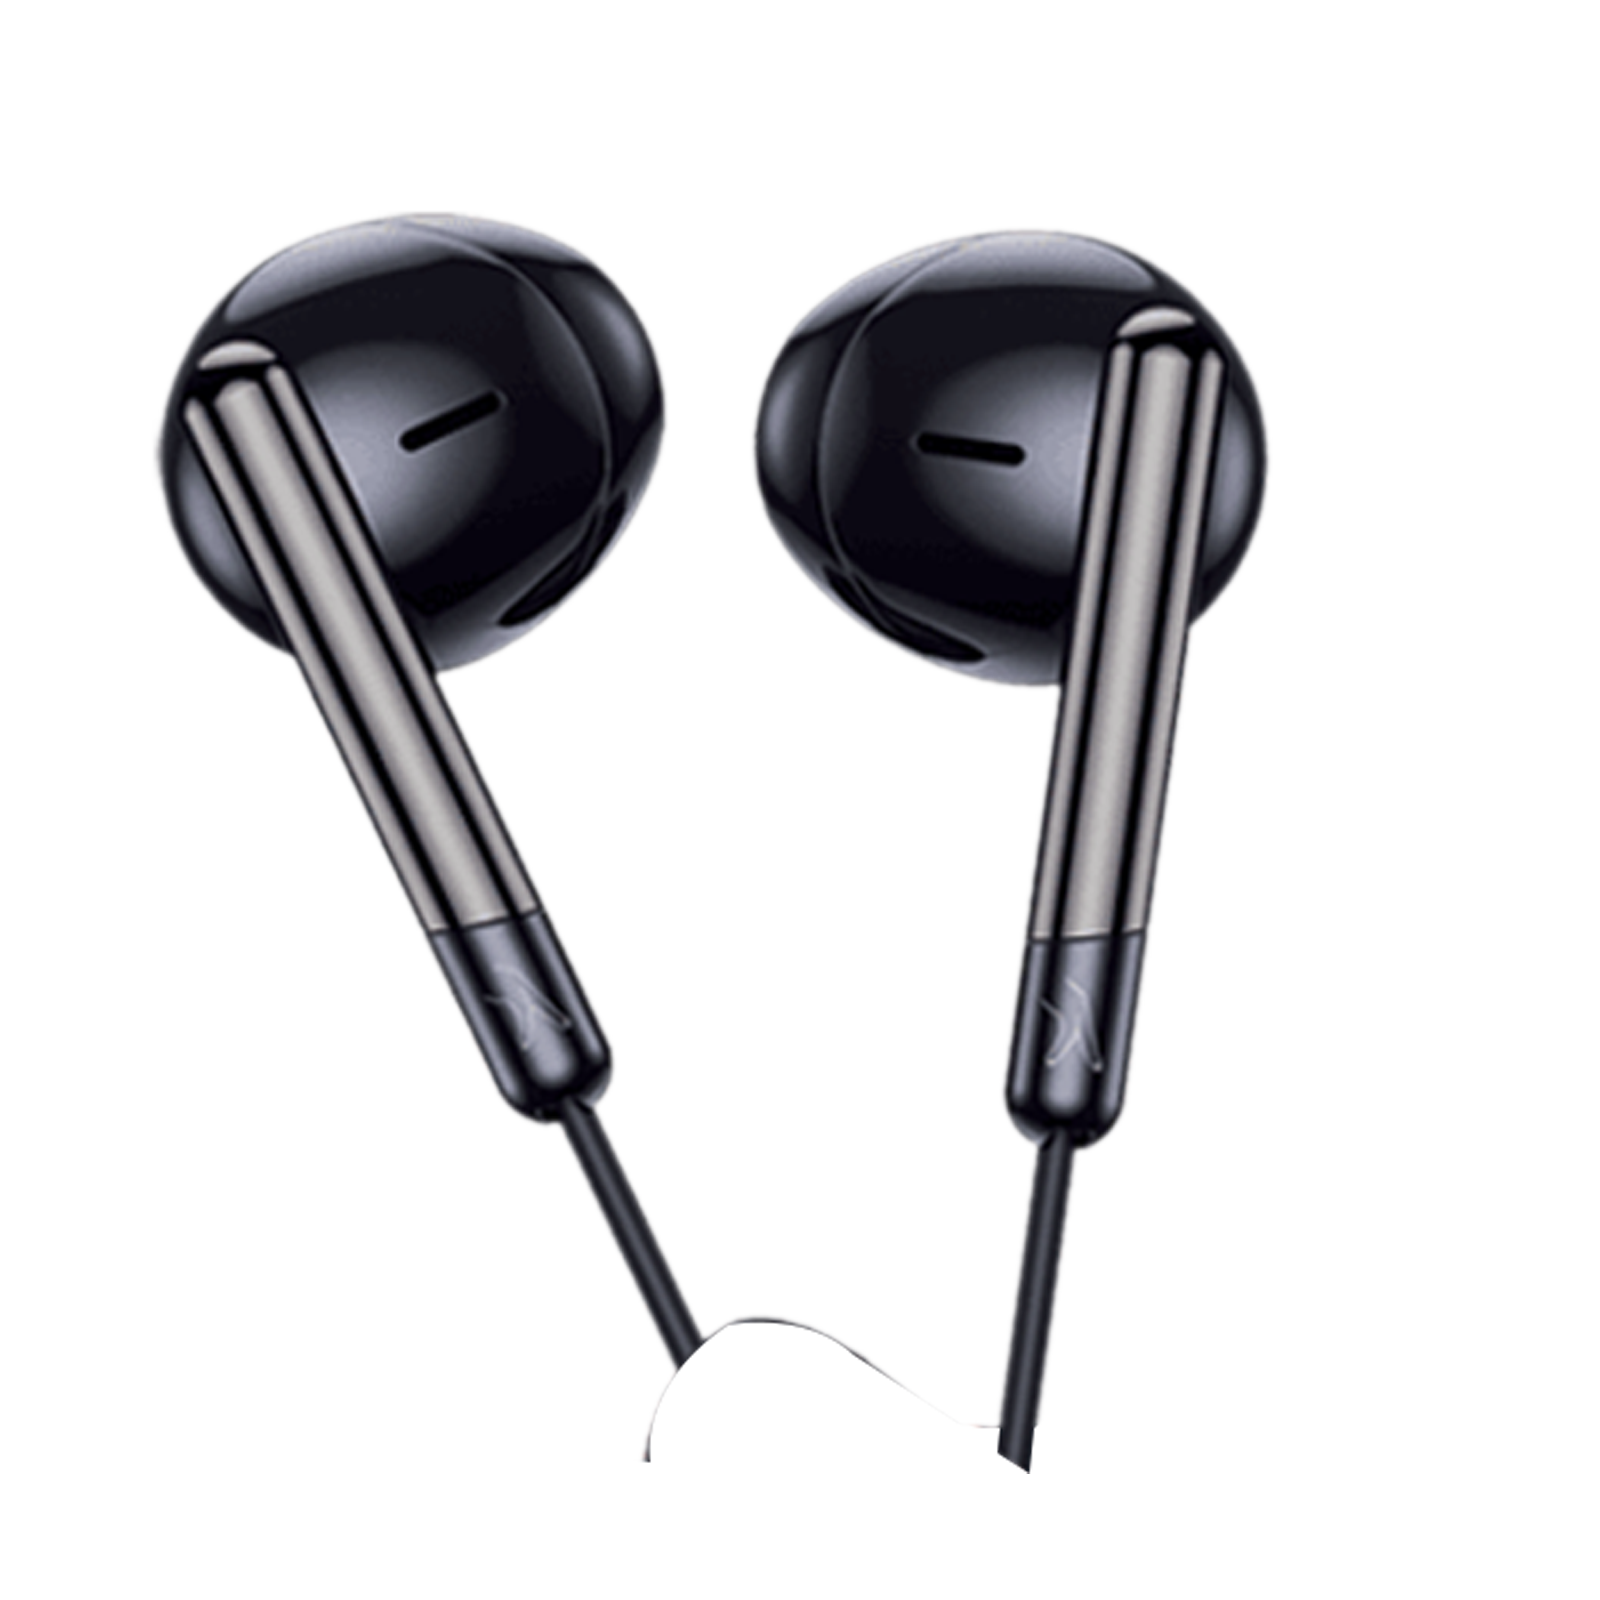 Buy Clear Voice Earphones Online at Best Prices | Croma